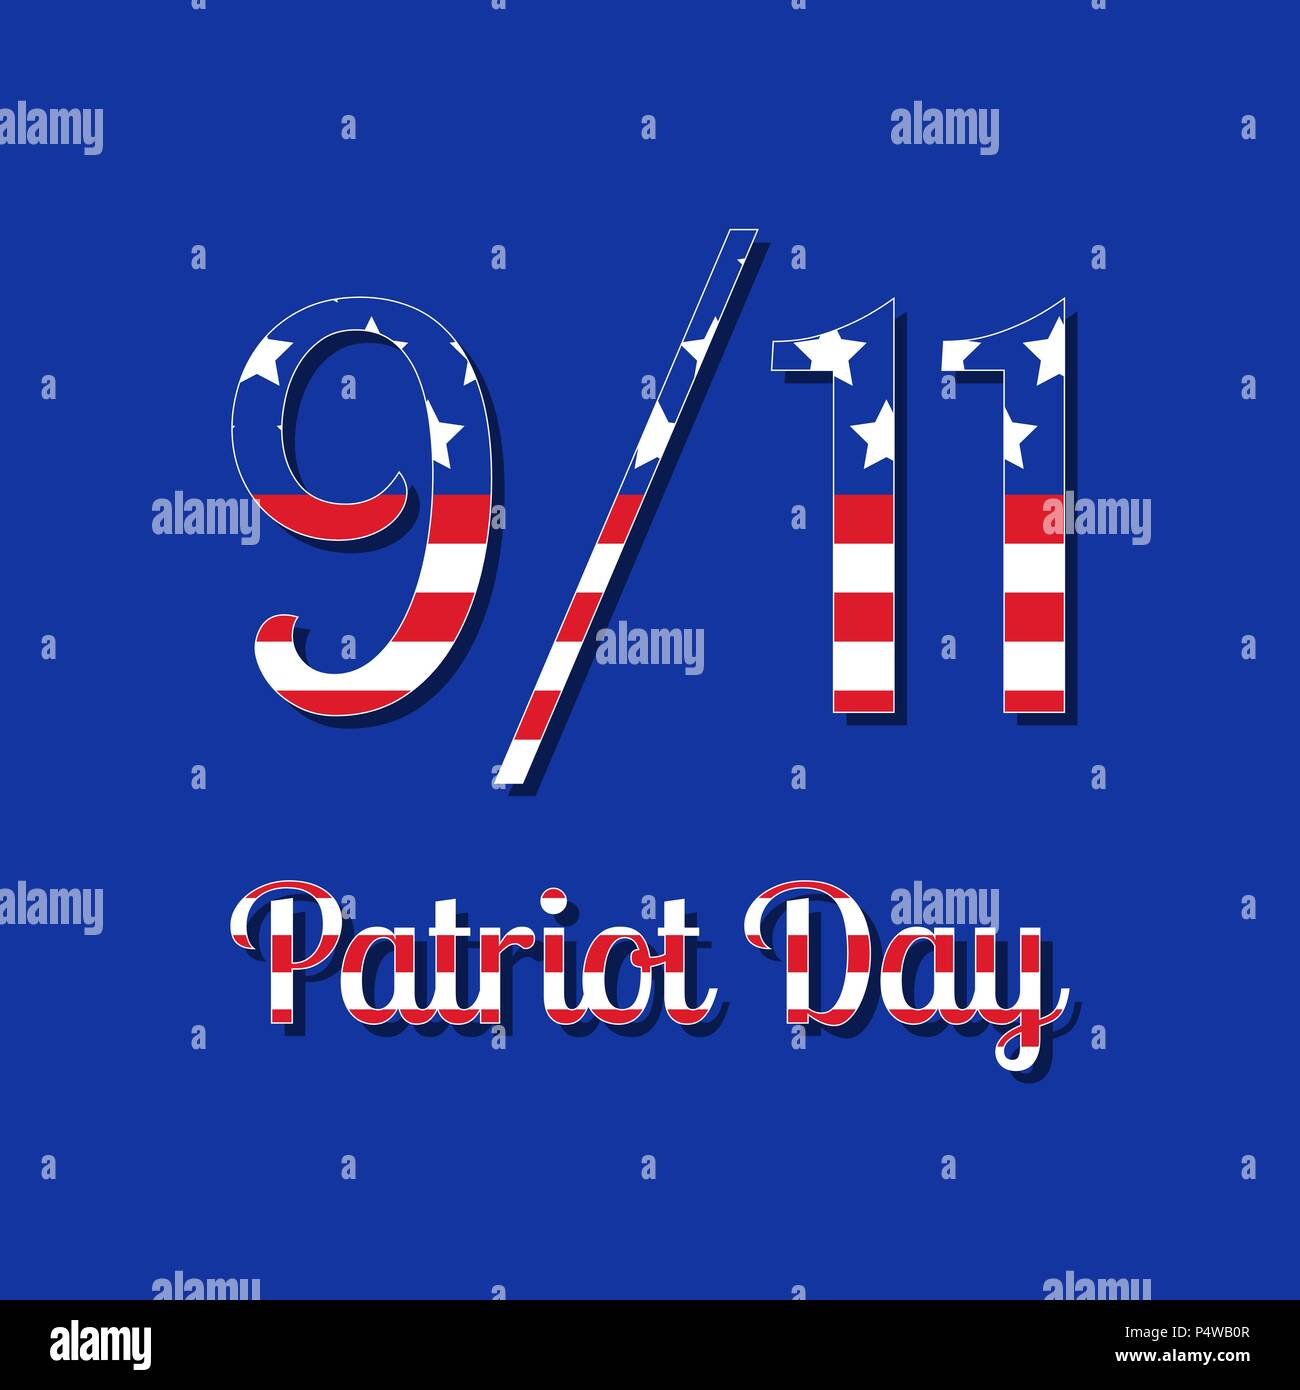 Patriot Day in the United States. 11 September. Concept of the American national holiday. Text with USA flag image. Blue background Stock Vector